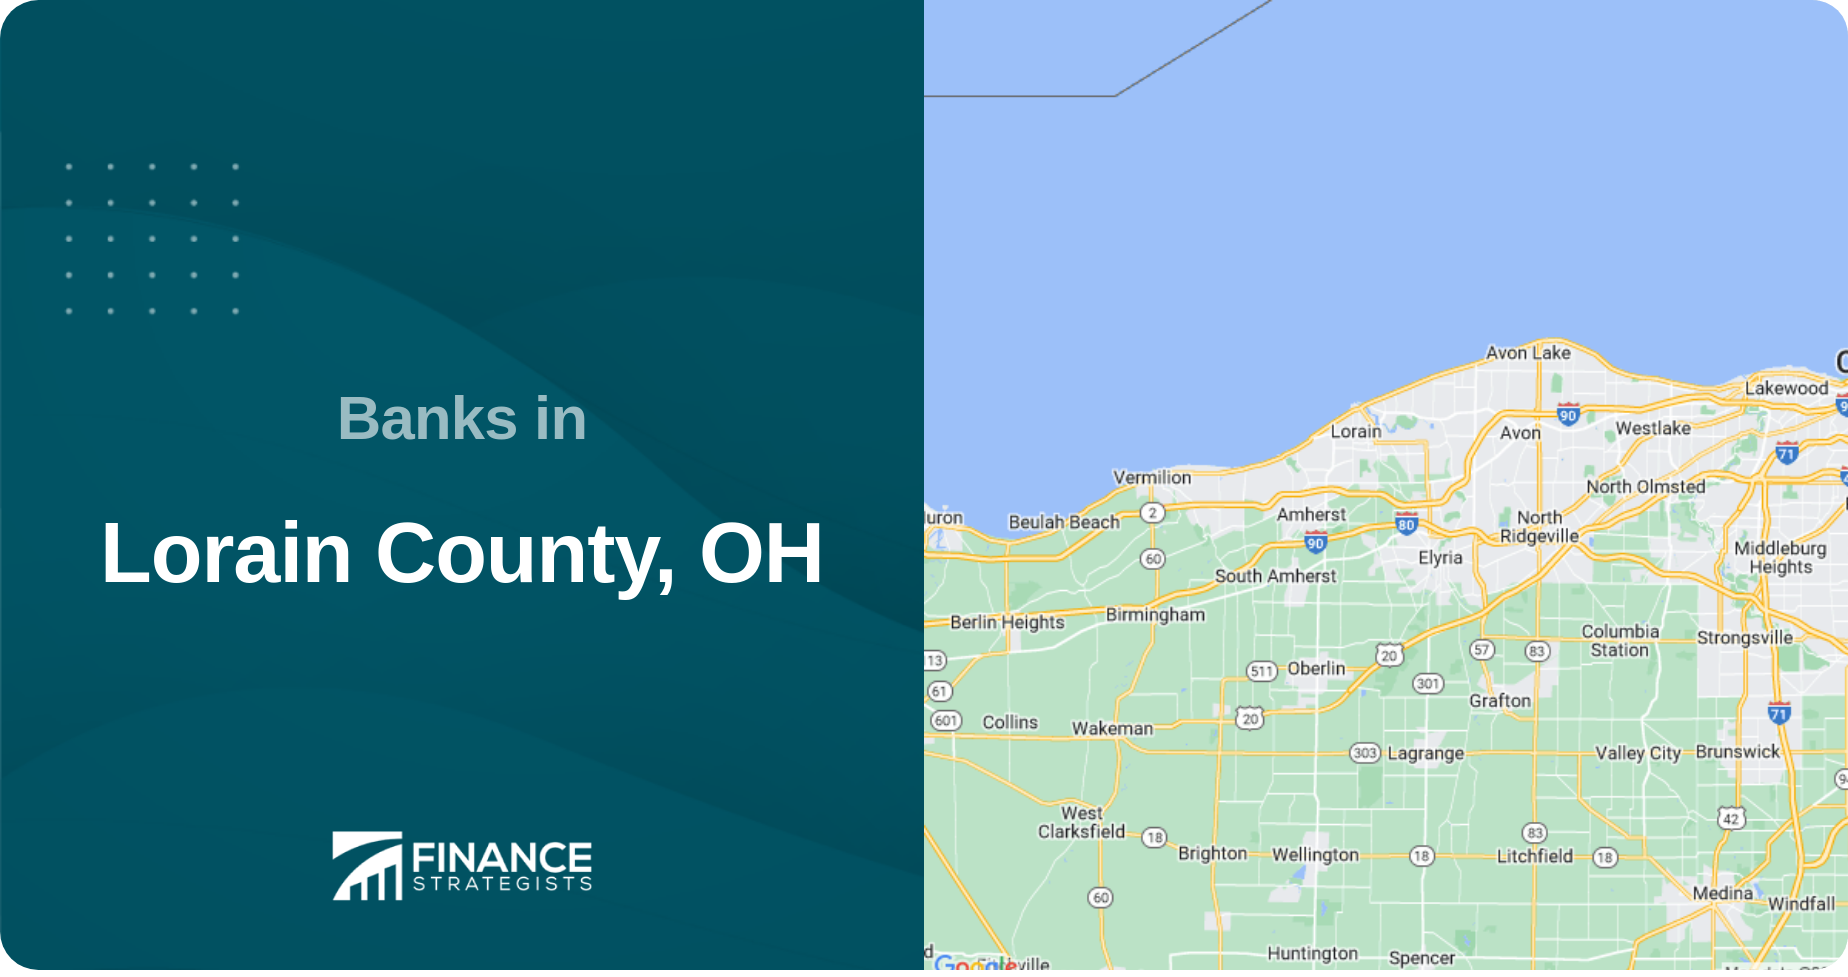 Banks in Lorain County, OH